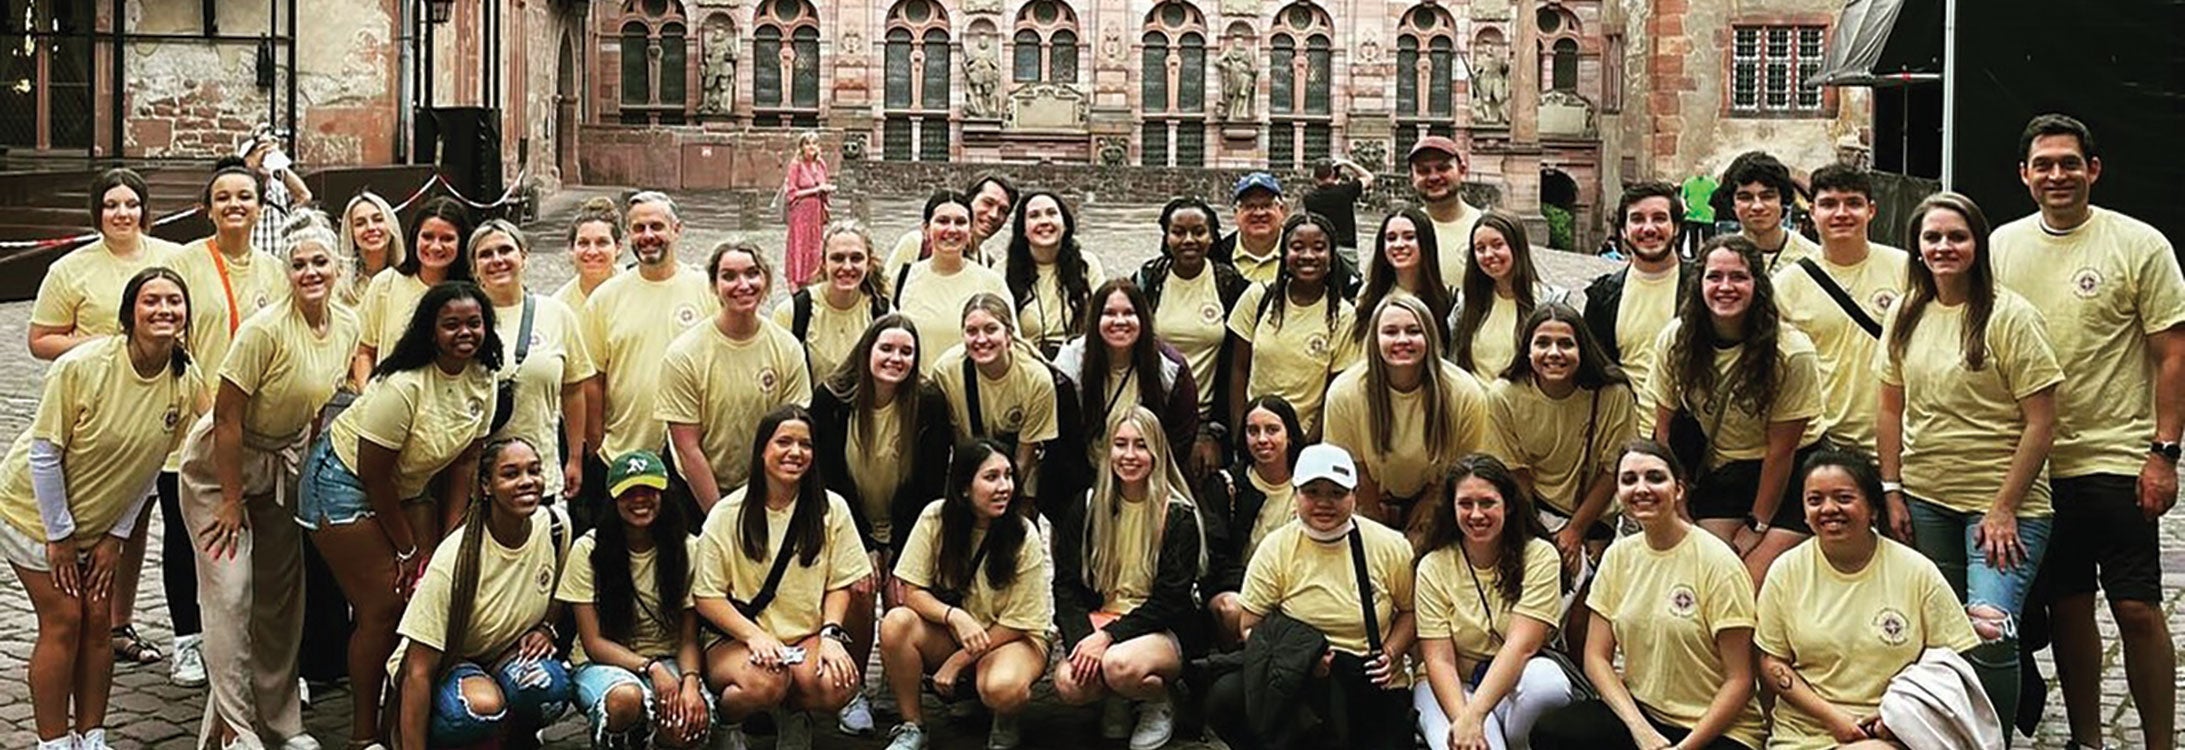 Forty students from ECU’s College of Health and Human Performance traveled across Europe last summer, including a stop at Heidelberg Castle in Heidelberg, Germany.